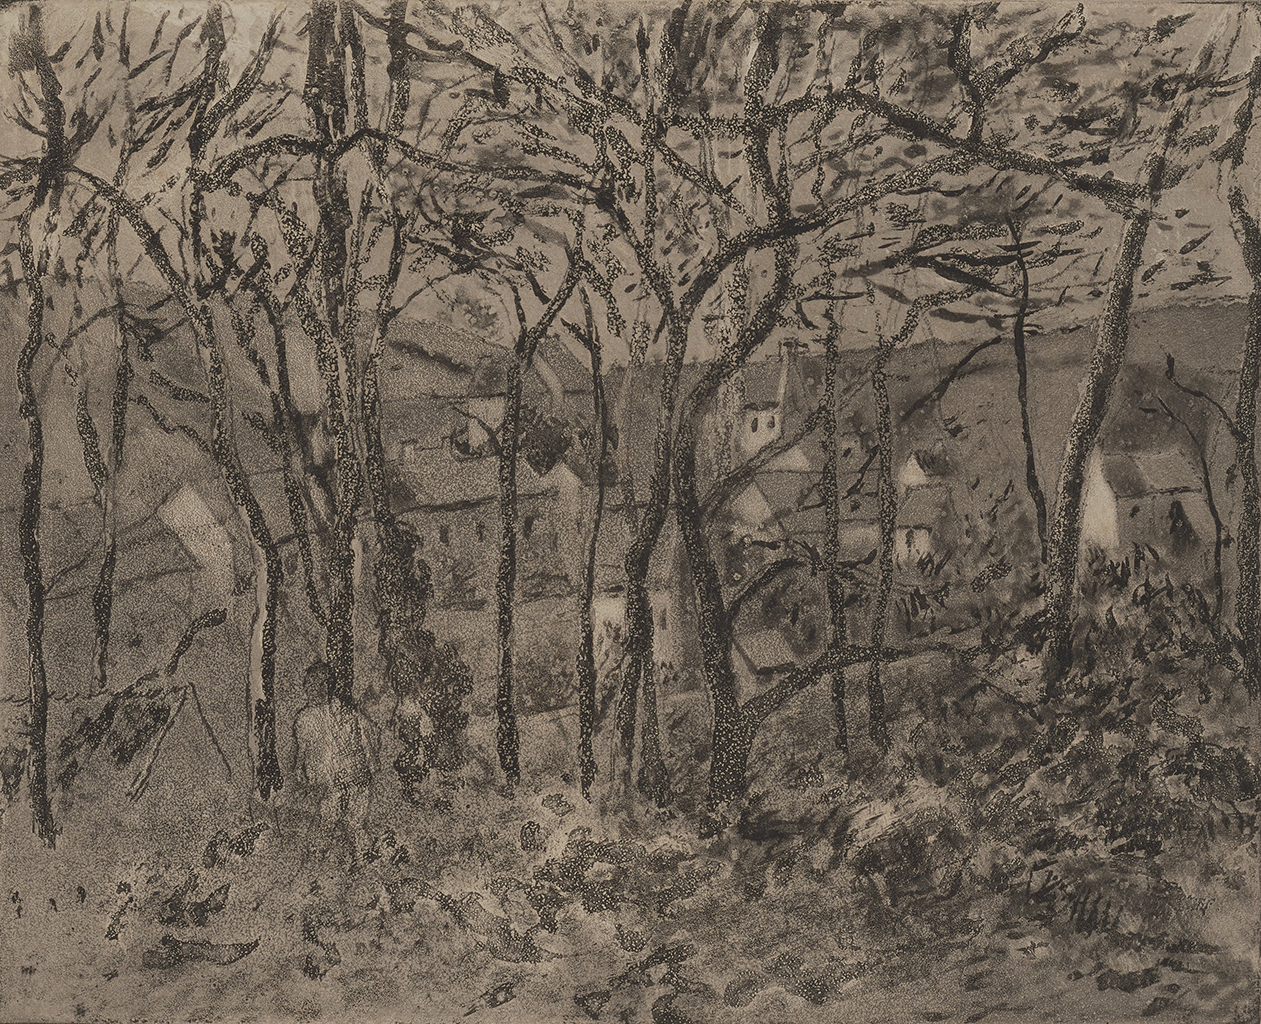 A black and white sketch of black leafless trees overlooking a large town shaded in the color gray.